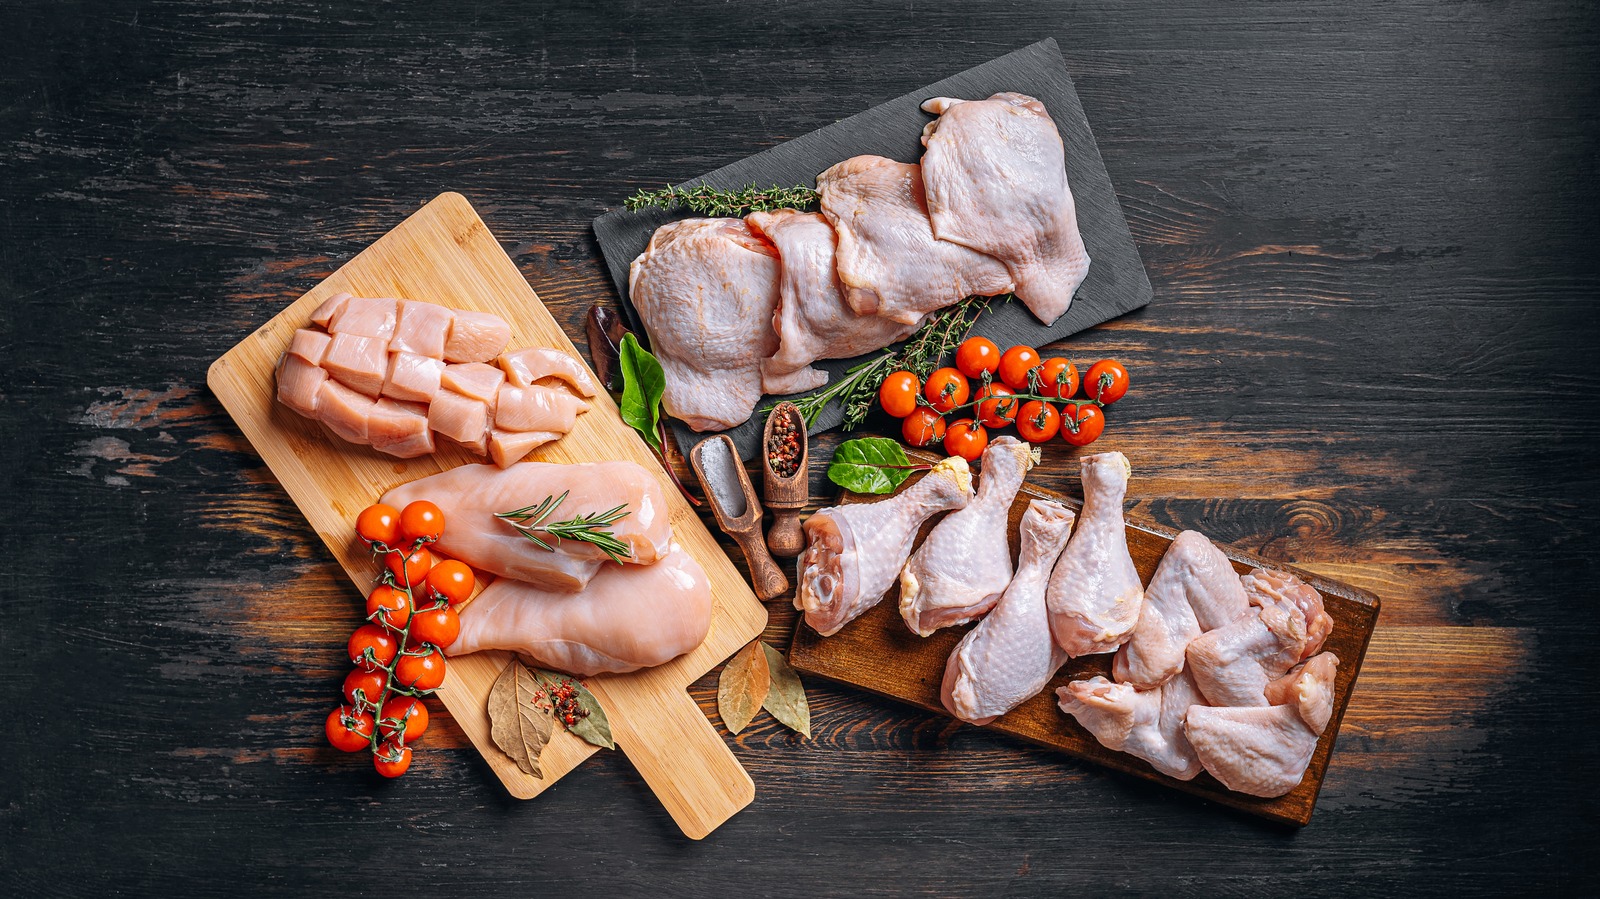 Ranking The Cuts And Parts Of Chicken From Worst To Best